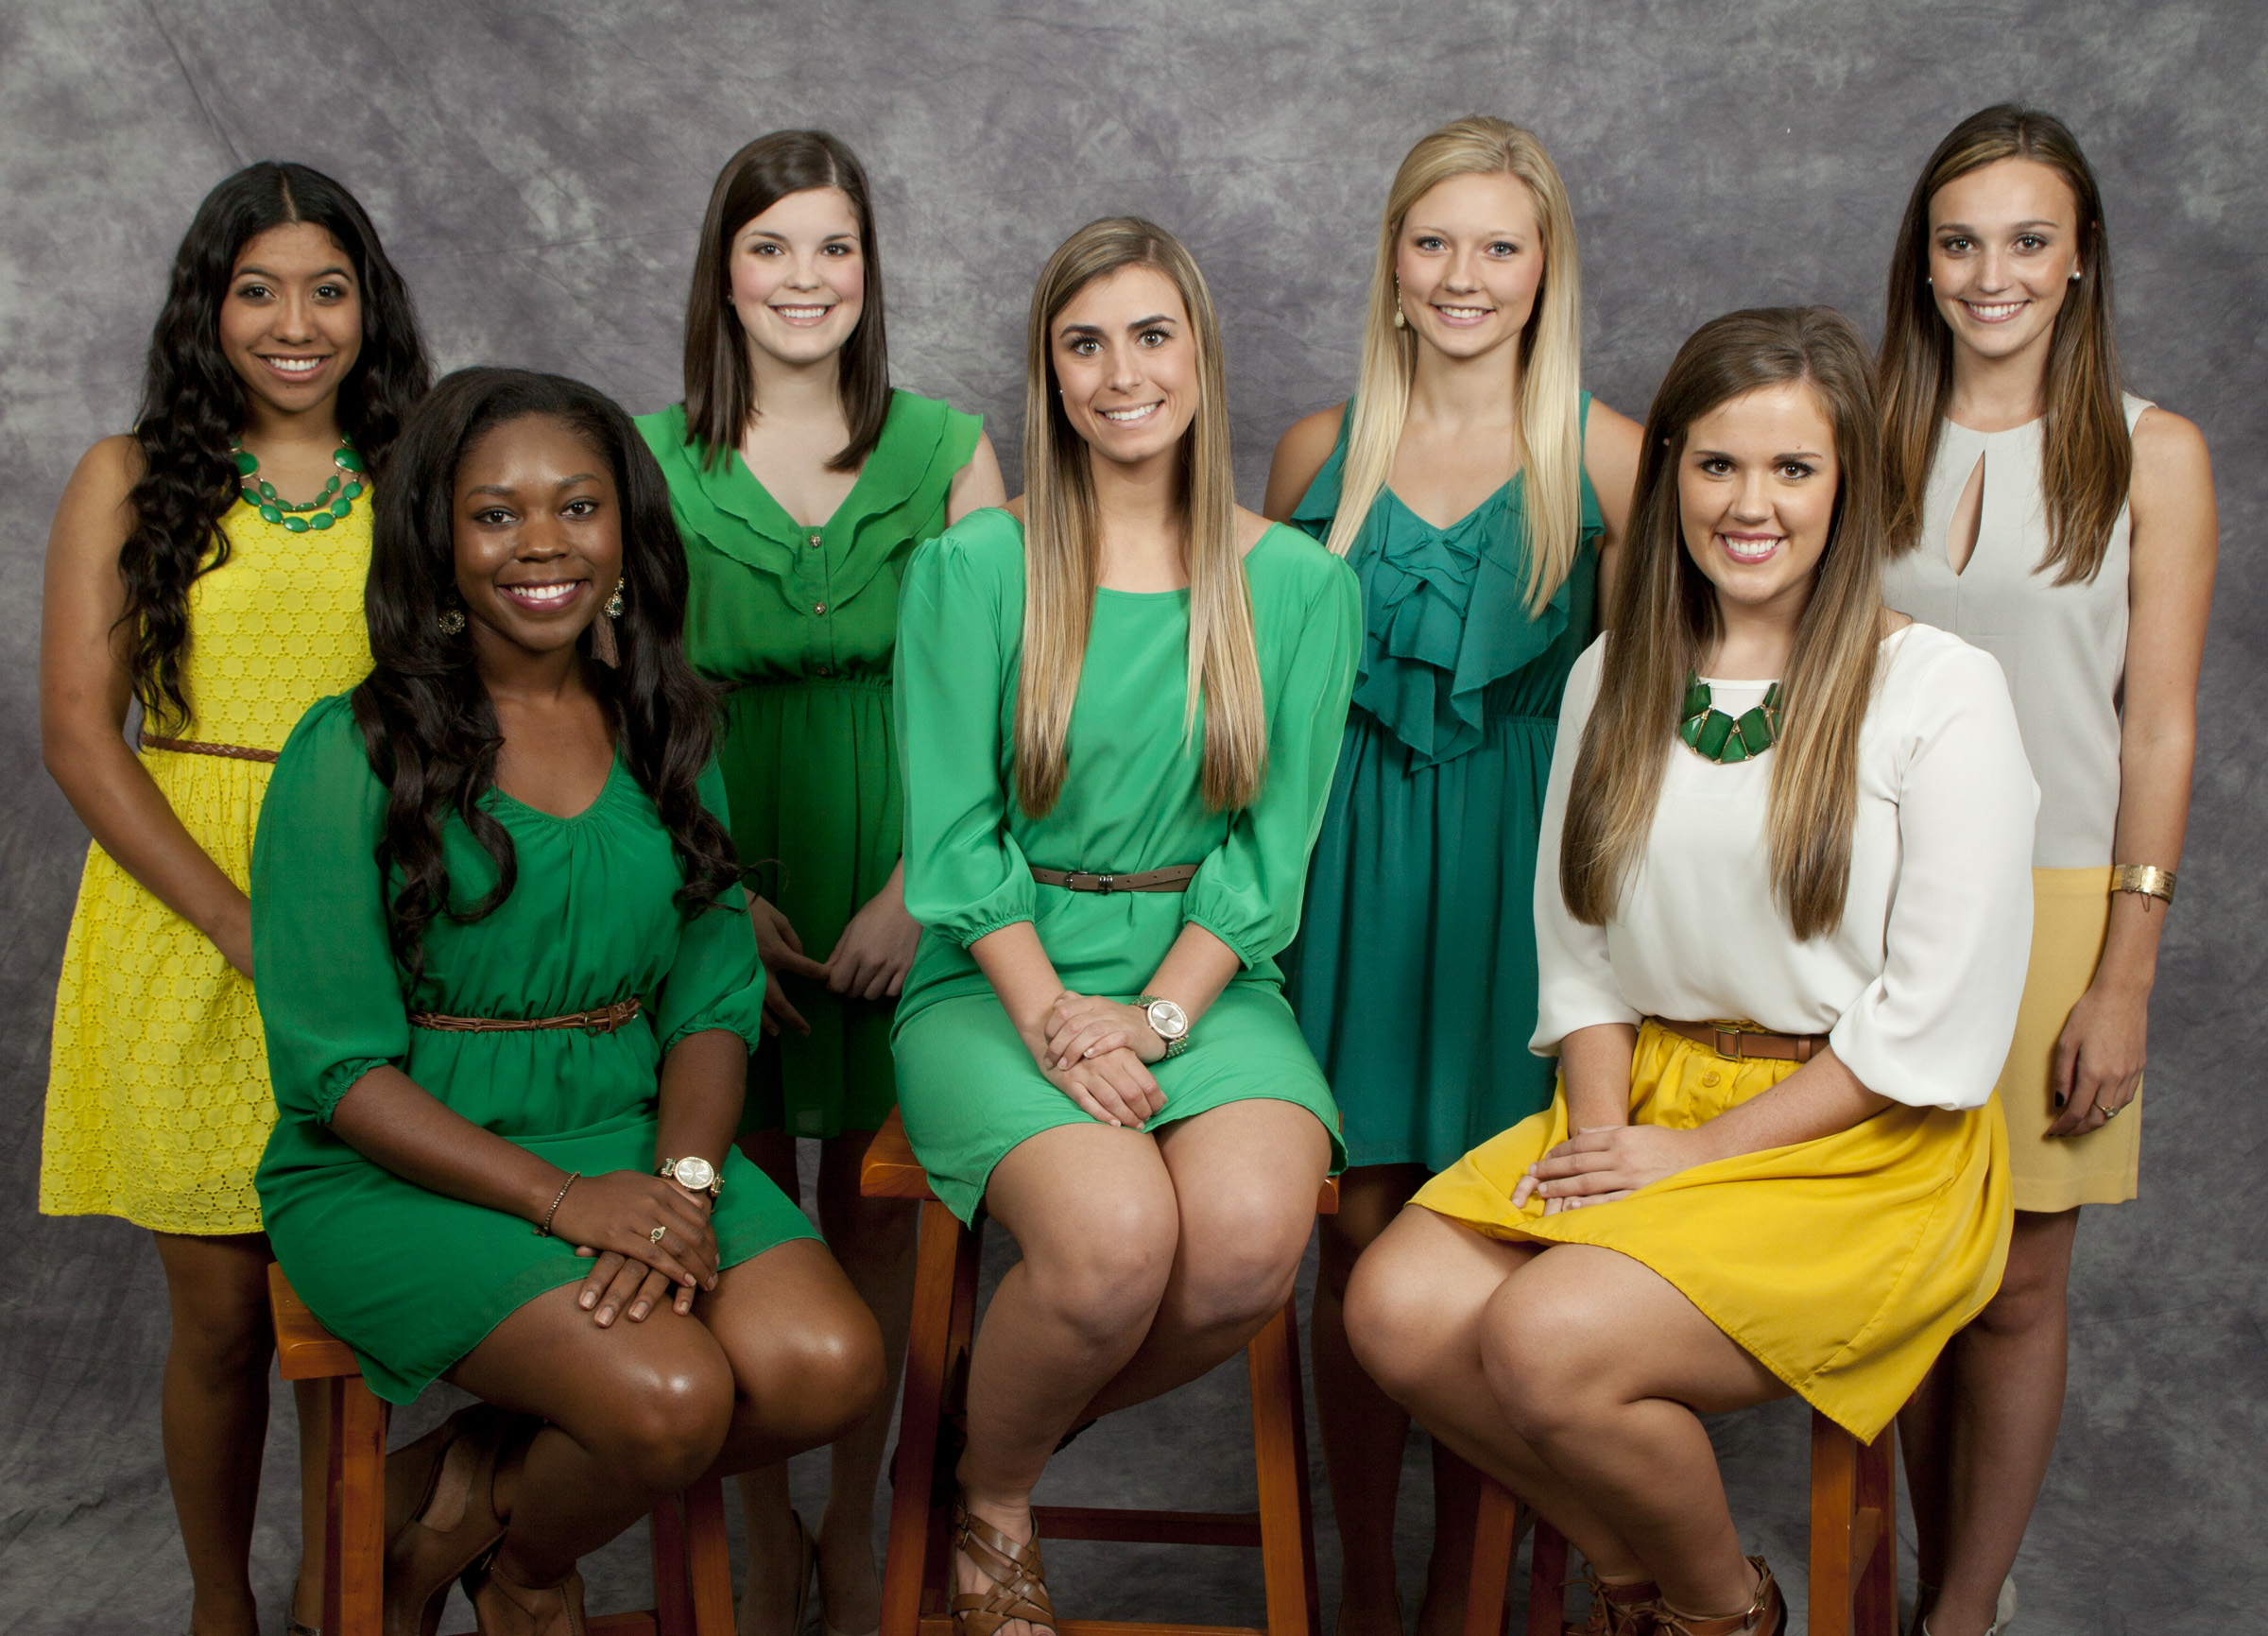 Southeastern announces 2014 Court and Beau Court